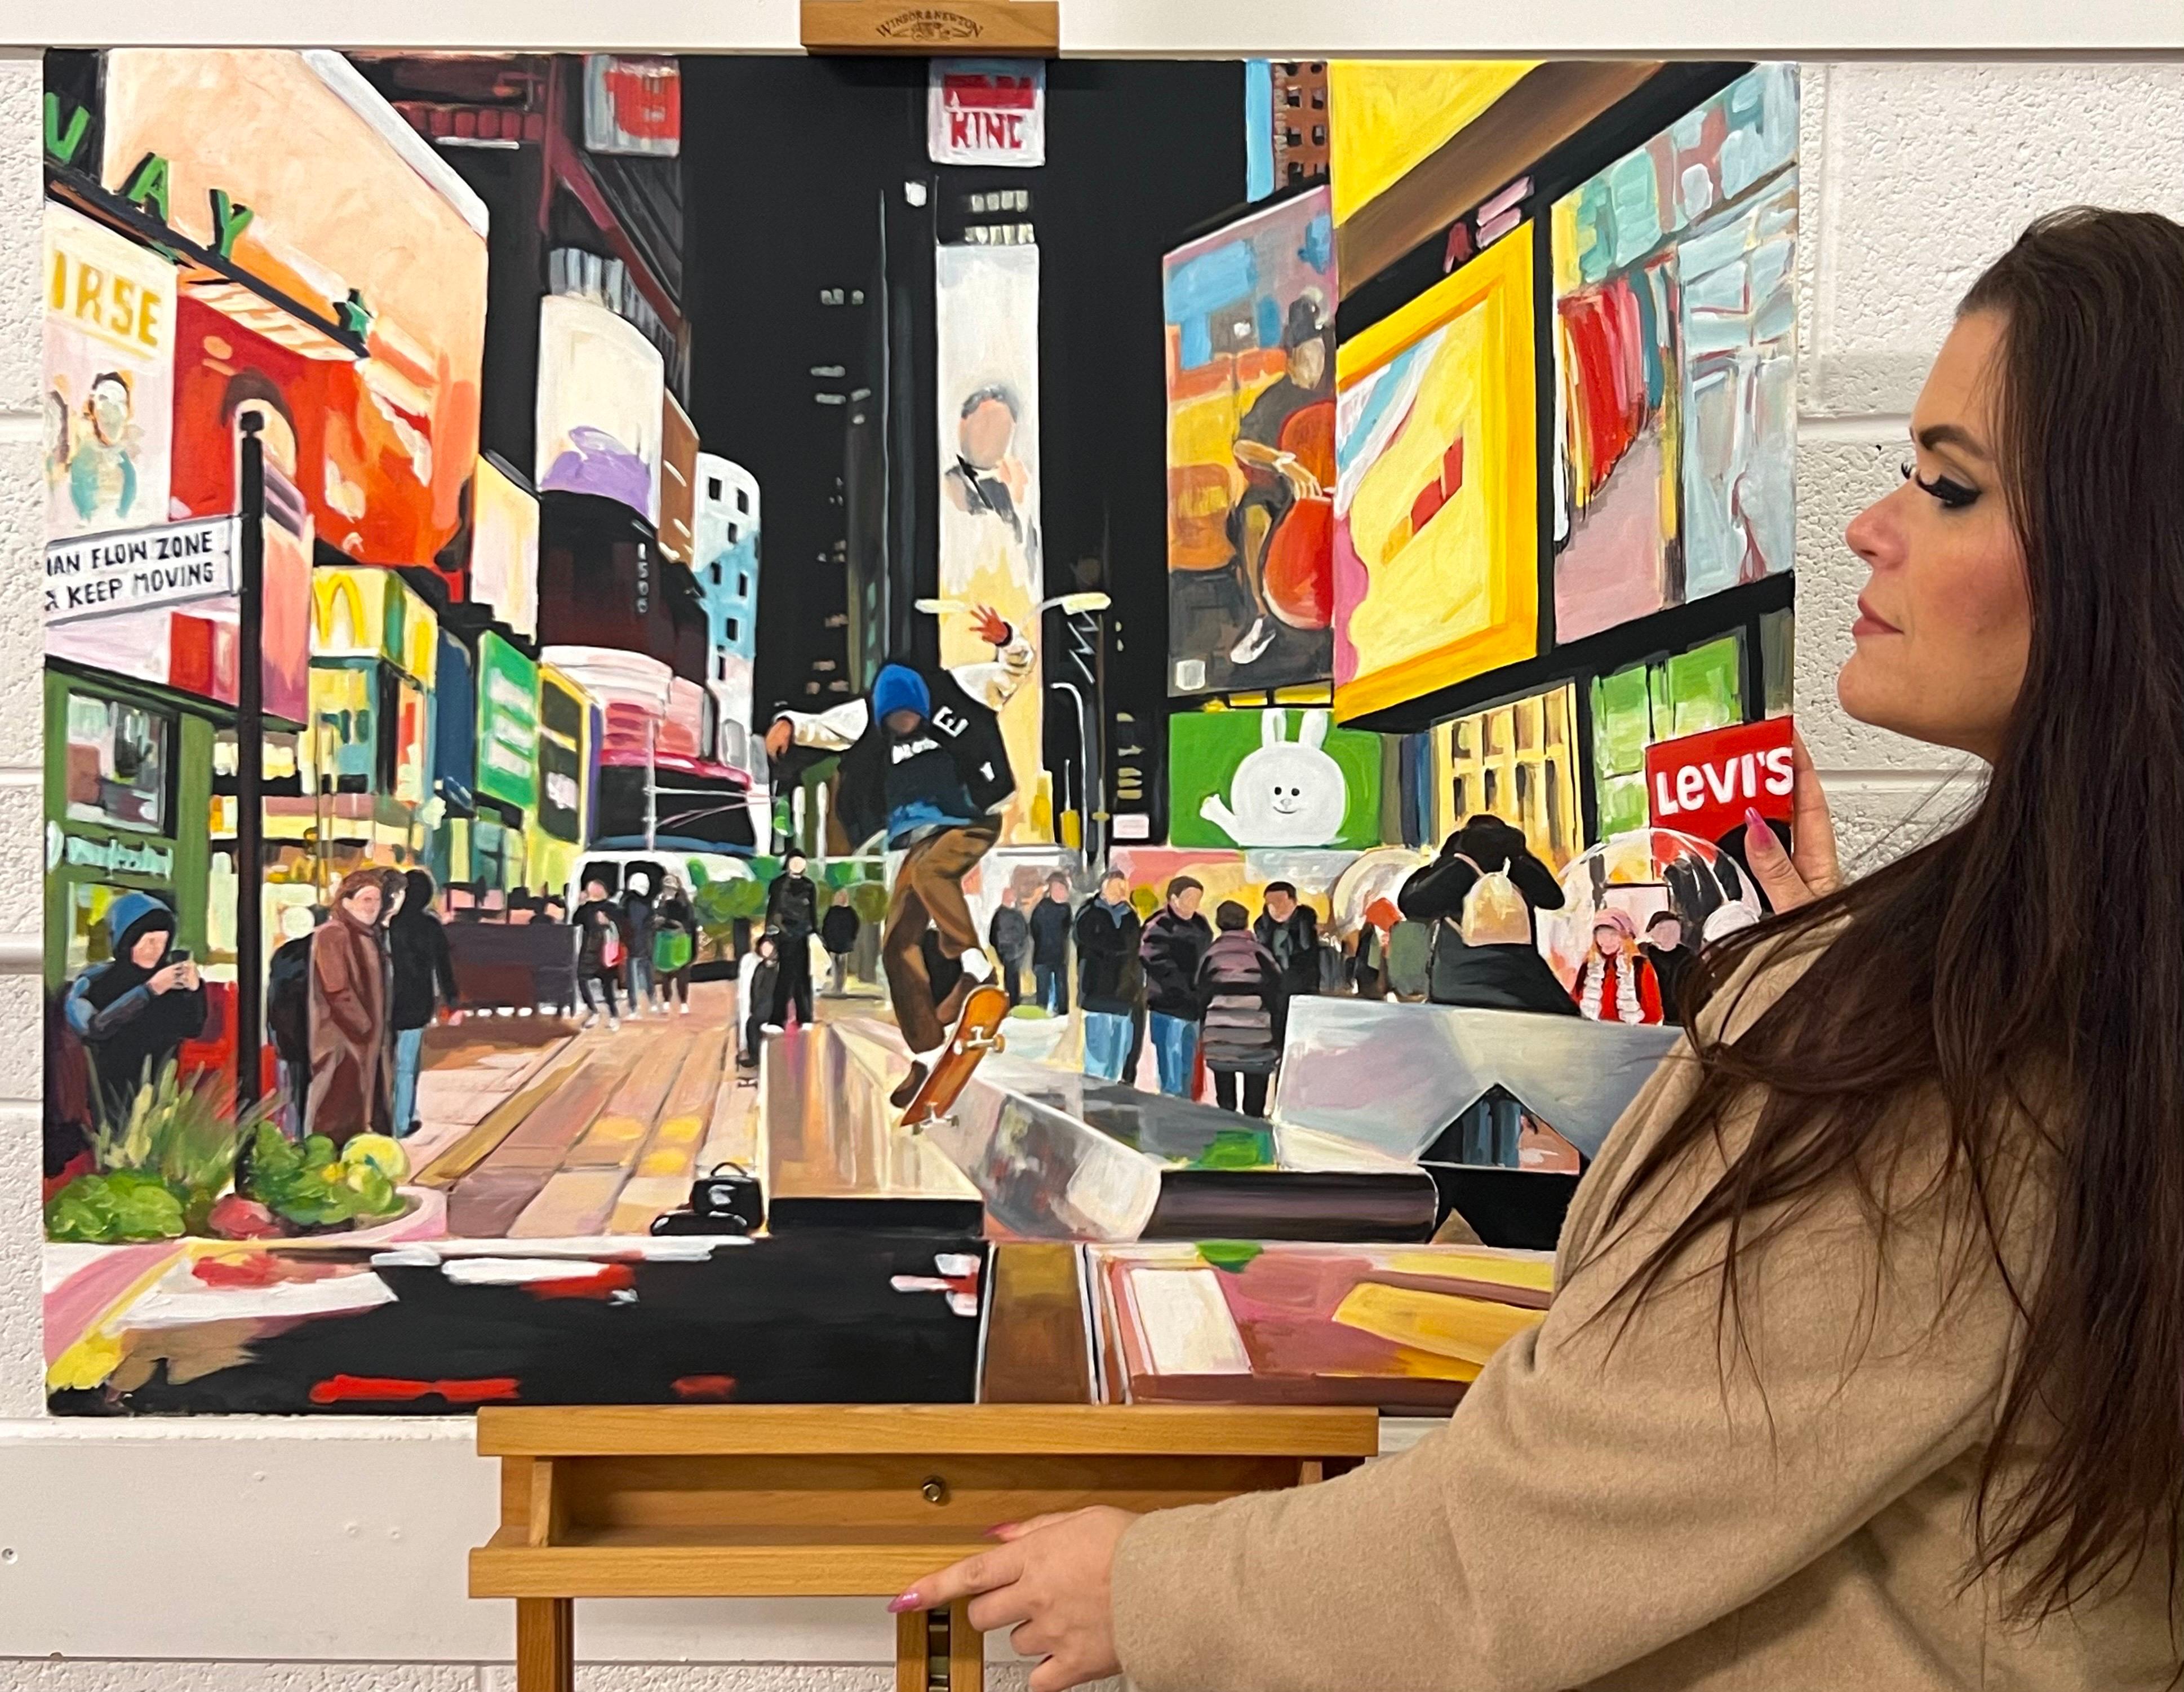 Skate Boarder Times Square New York City after the Rain by British Urban Artist - Painting by Angela Wakefield